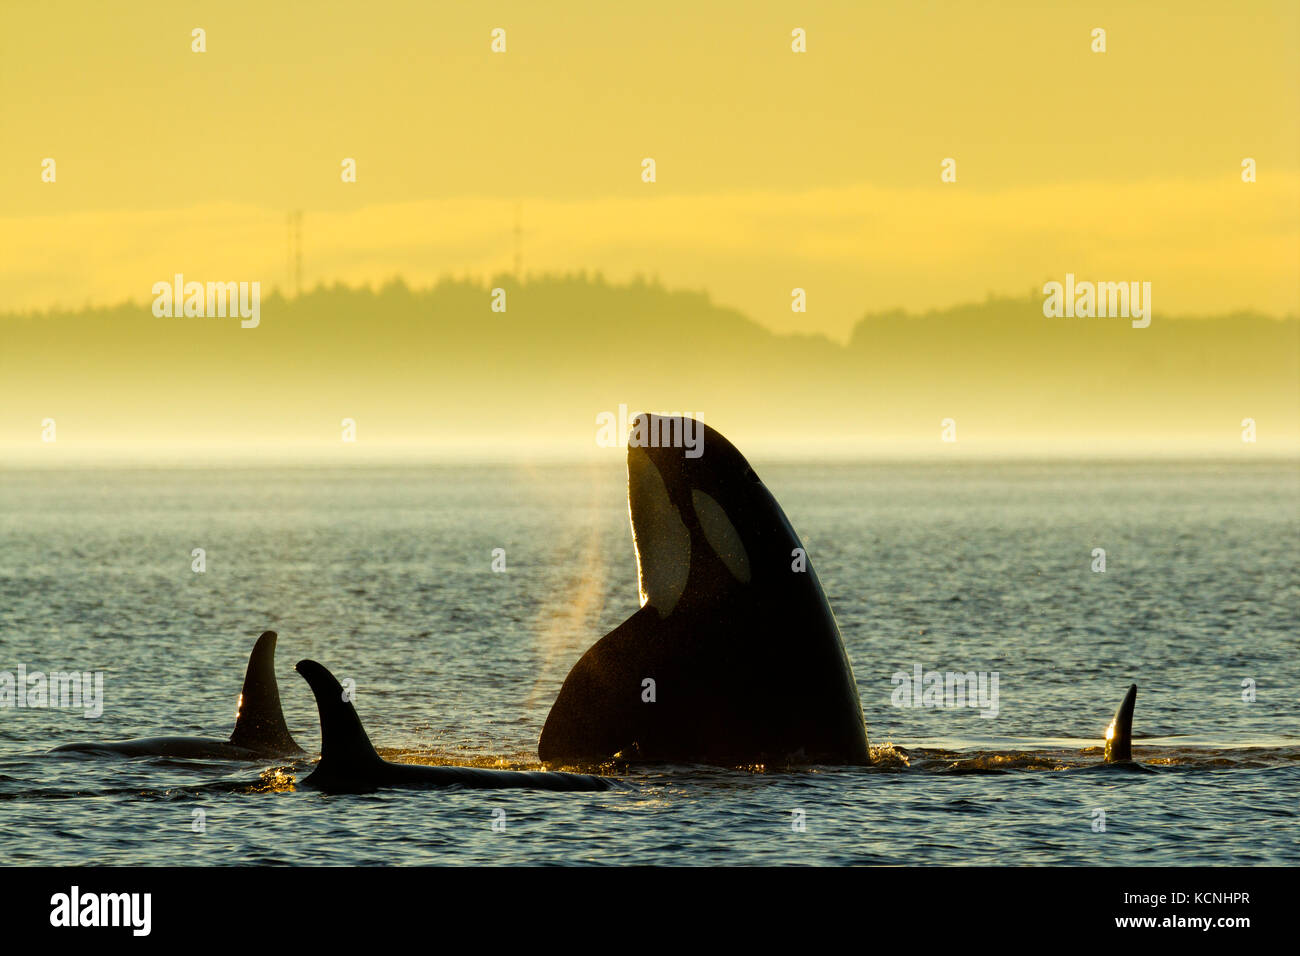 Northern Resident Killer whales playing and spyhopping in front of Alert Bay, Cormorant Island, British Columbia, Canada. Orcinus orca Stock Photo